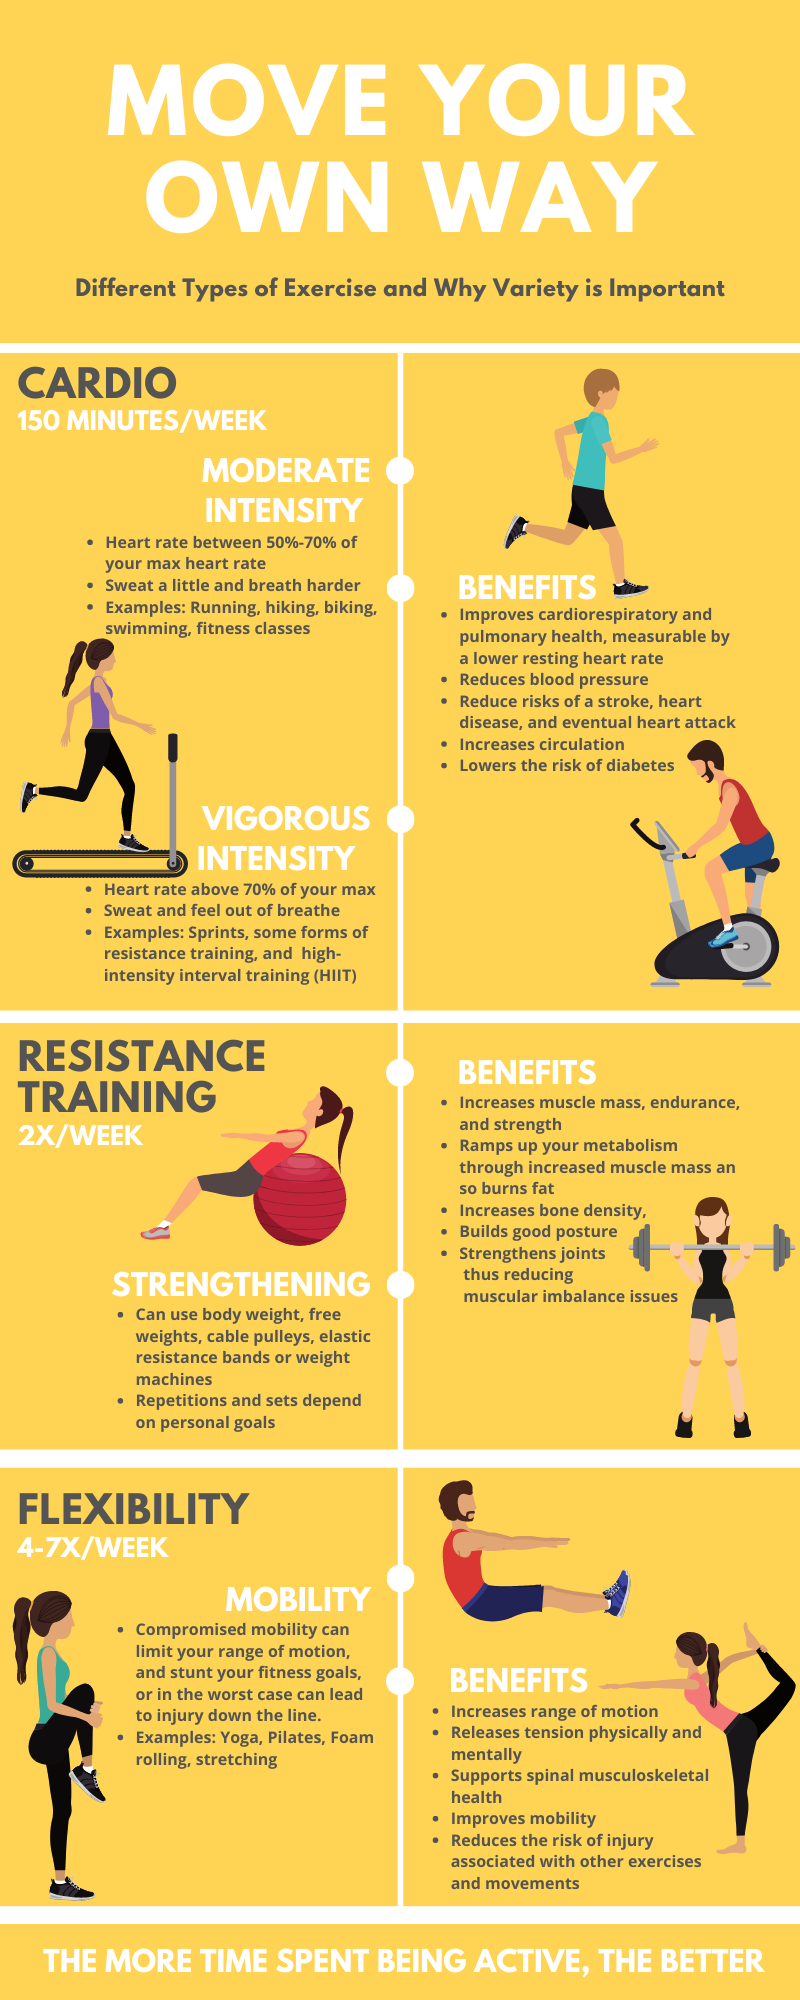 Description of different types of exercises and benefits